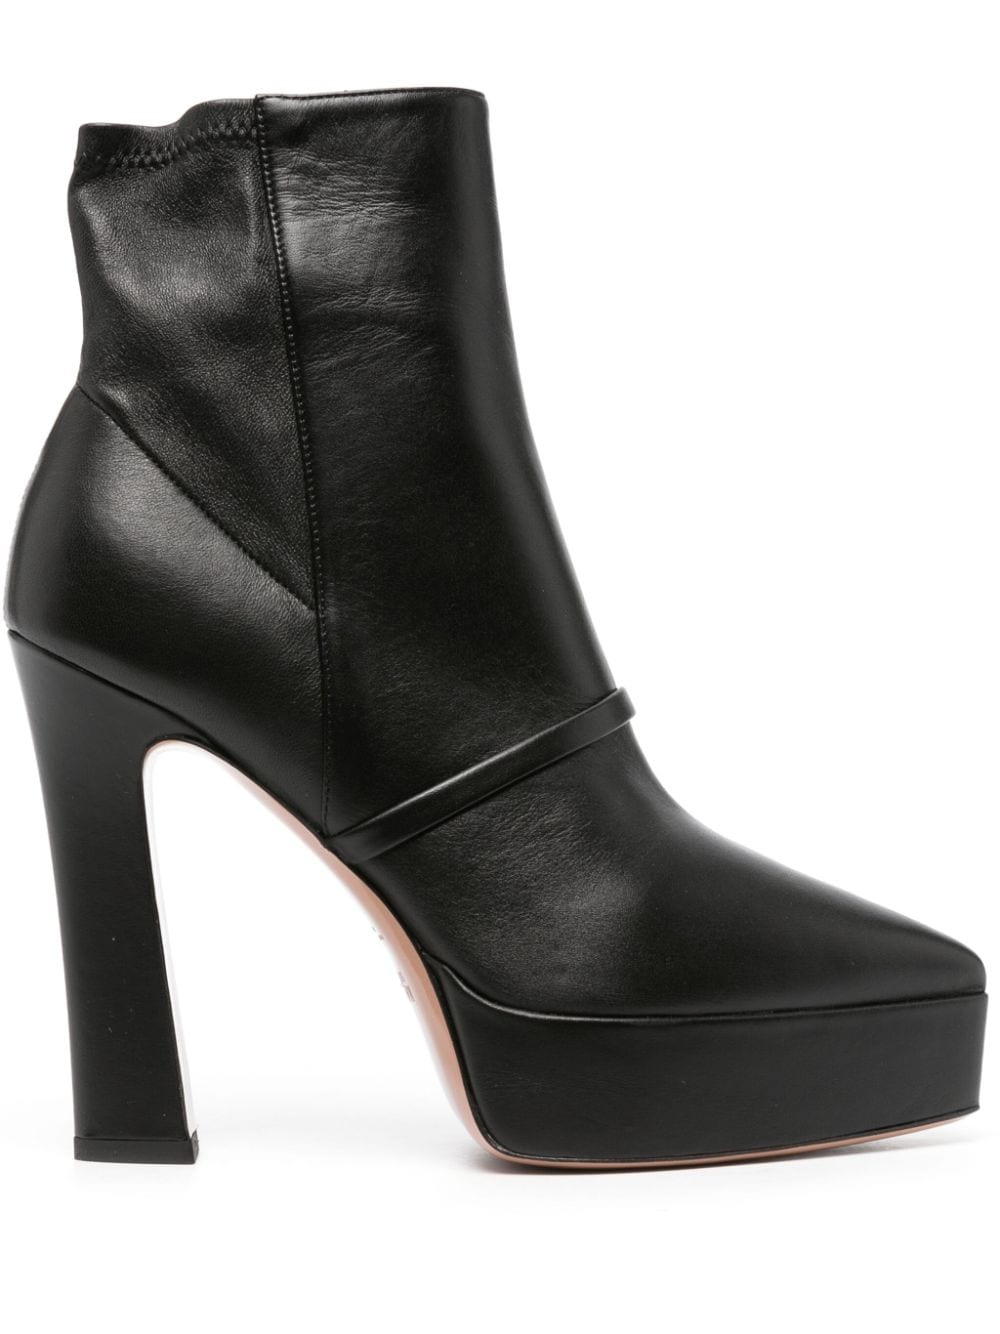 Malone Souliers 130mm platform leather ankle boots - Black von Malone Souliers